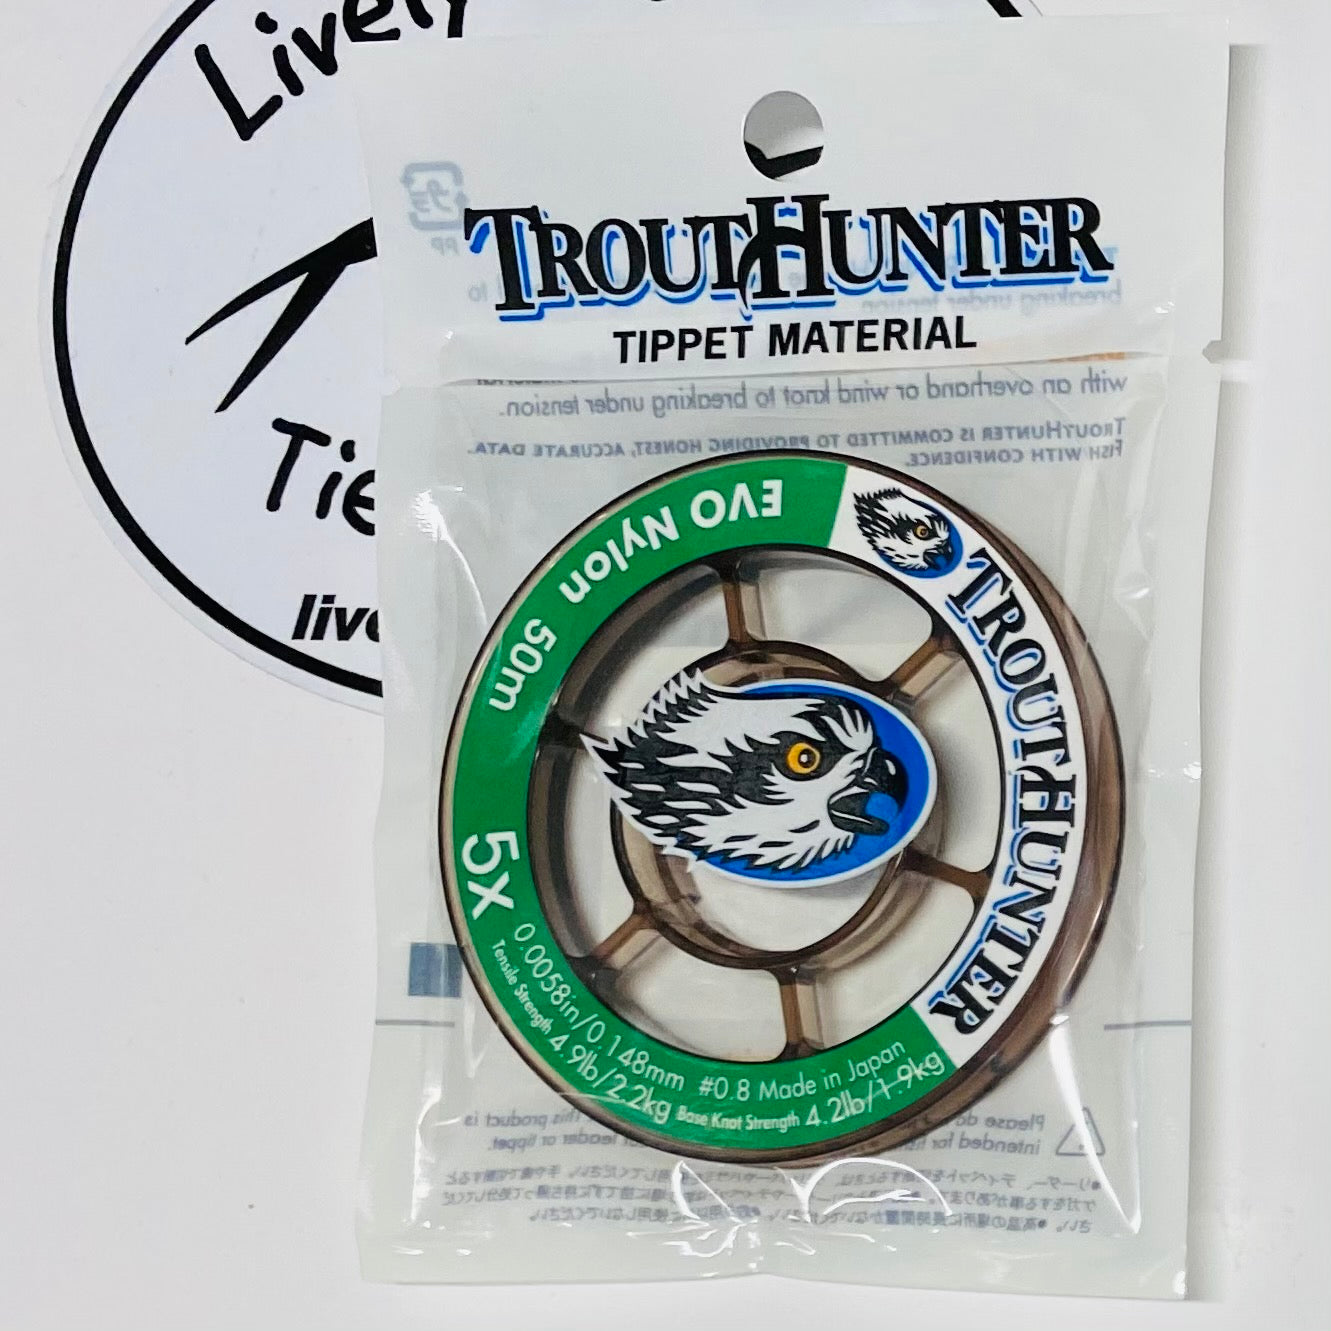 Zen Core for TroutHunter Tippet Spools – Get A Drift Outdoors